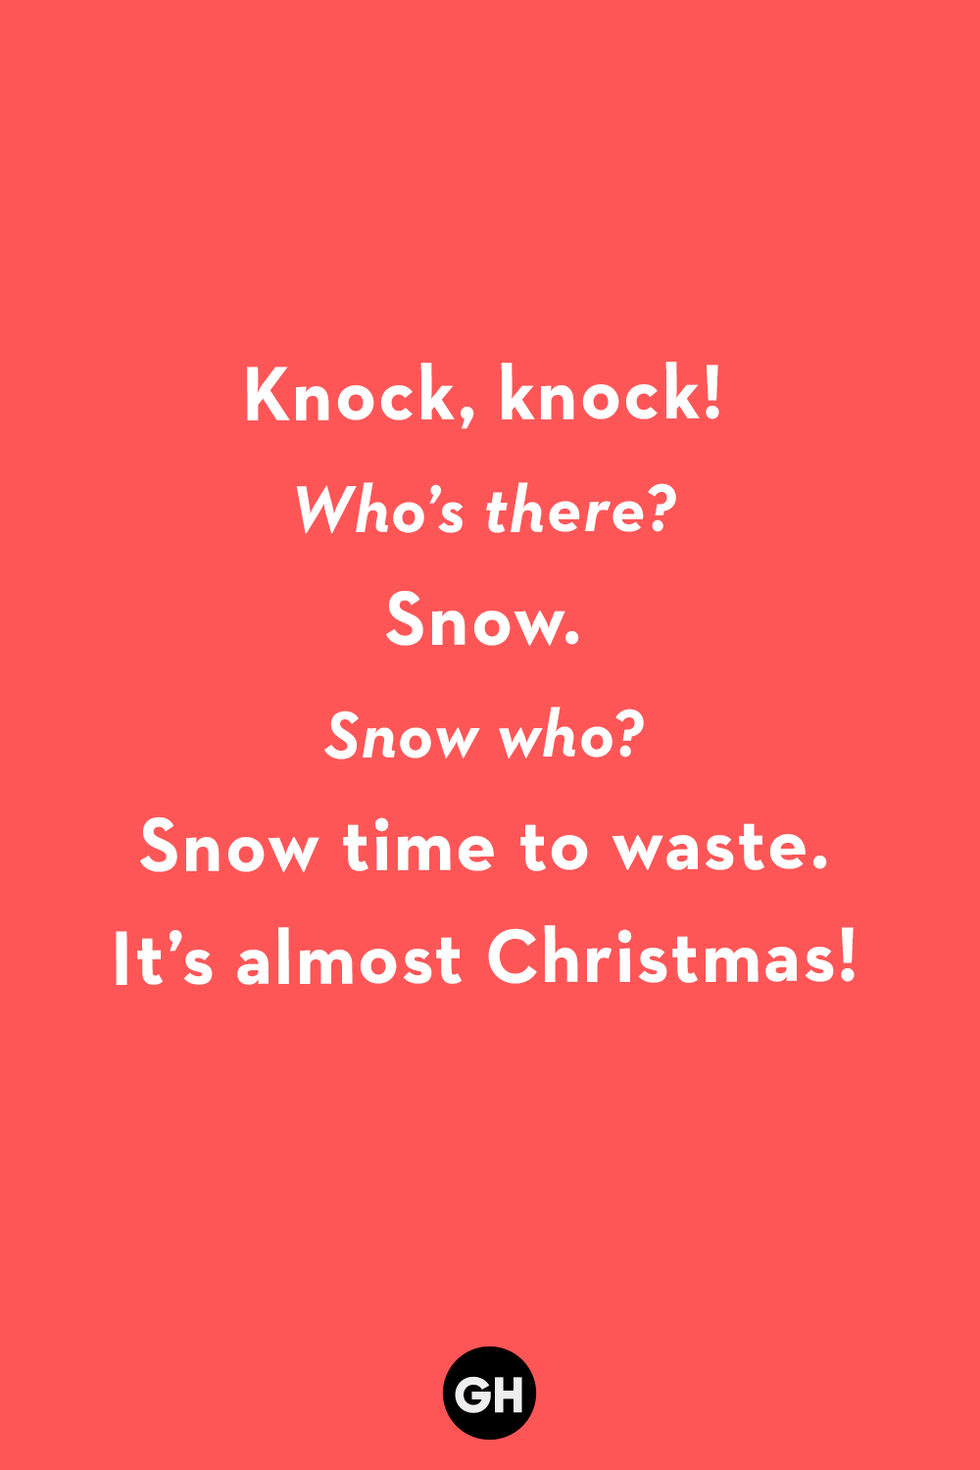 christmas jokes black text on red background